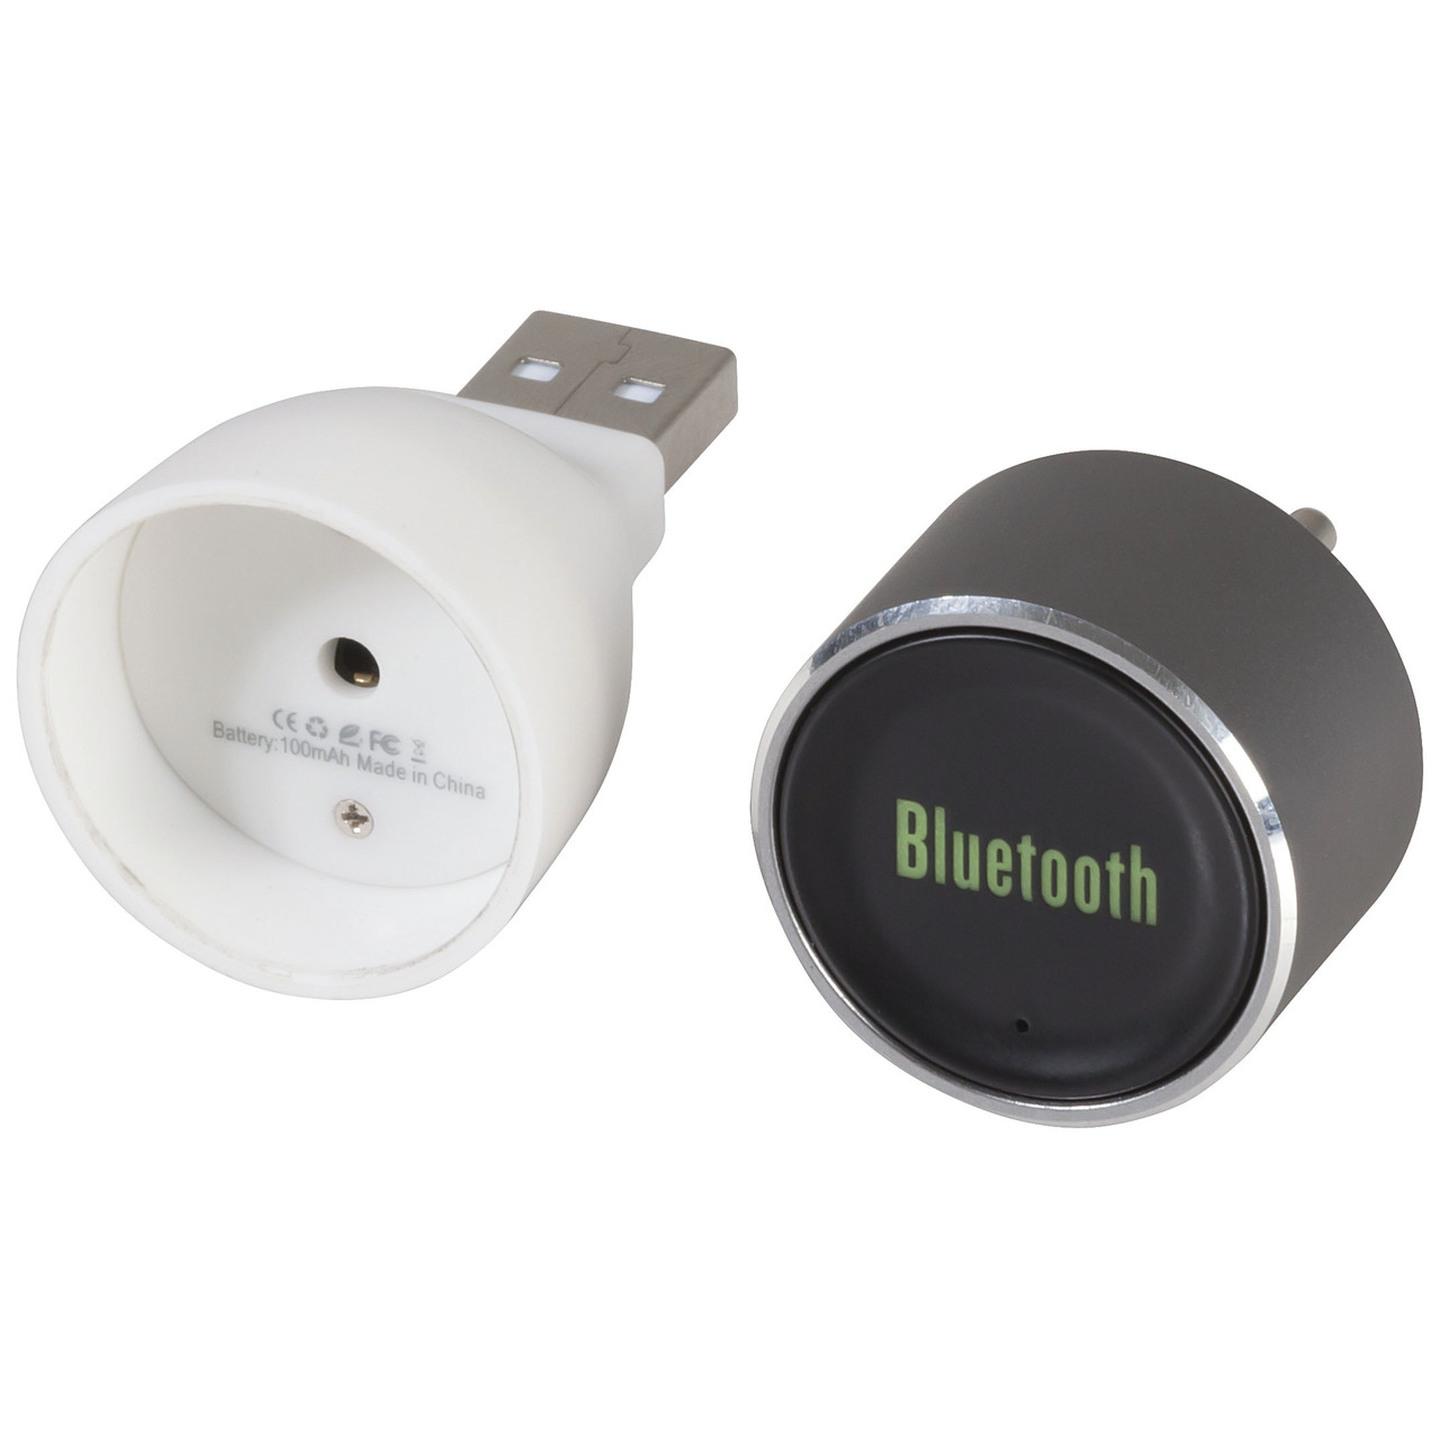 Bluetooth Dongle for 3.5mm Audio Interfaces